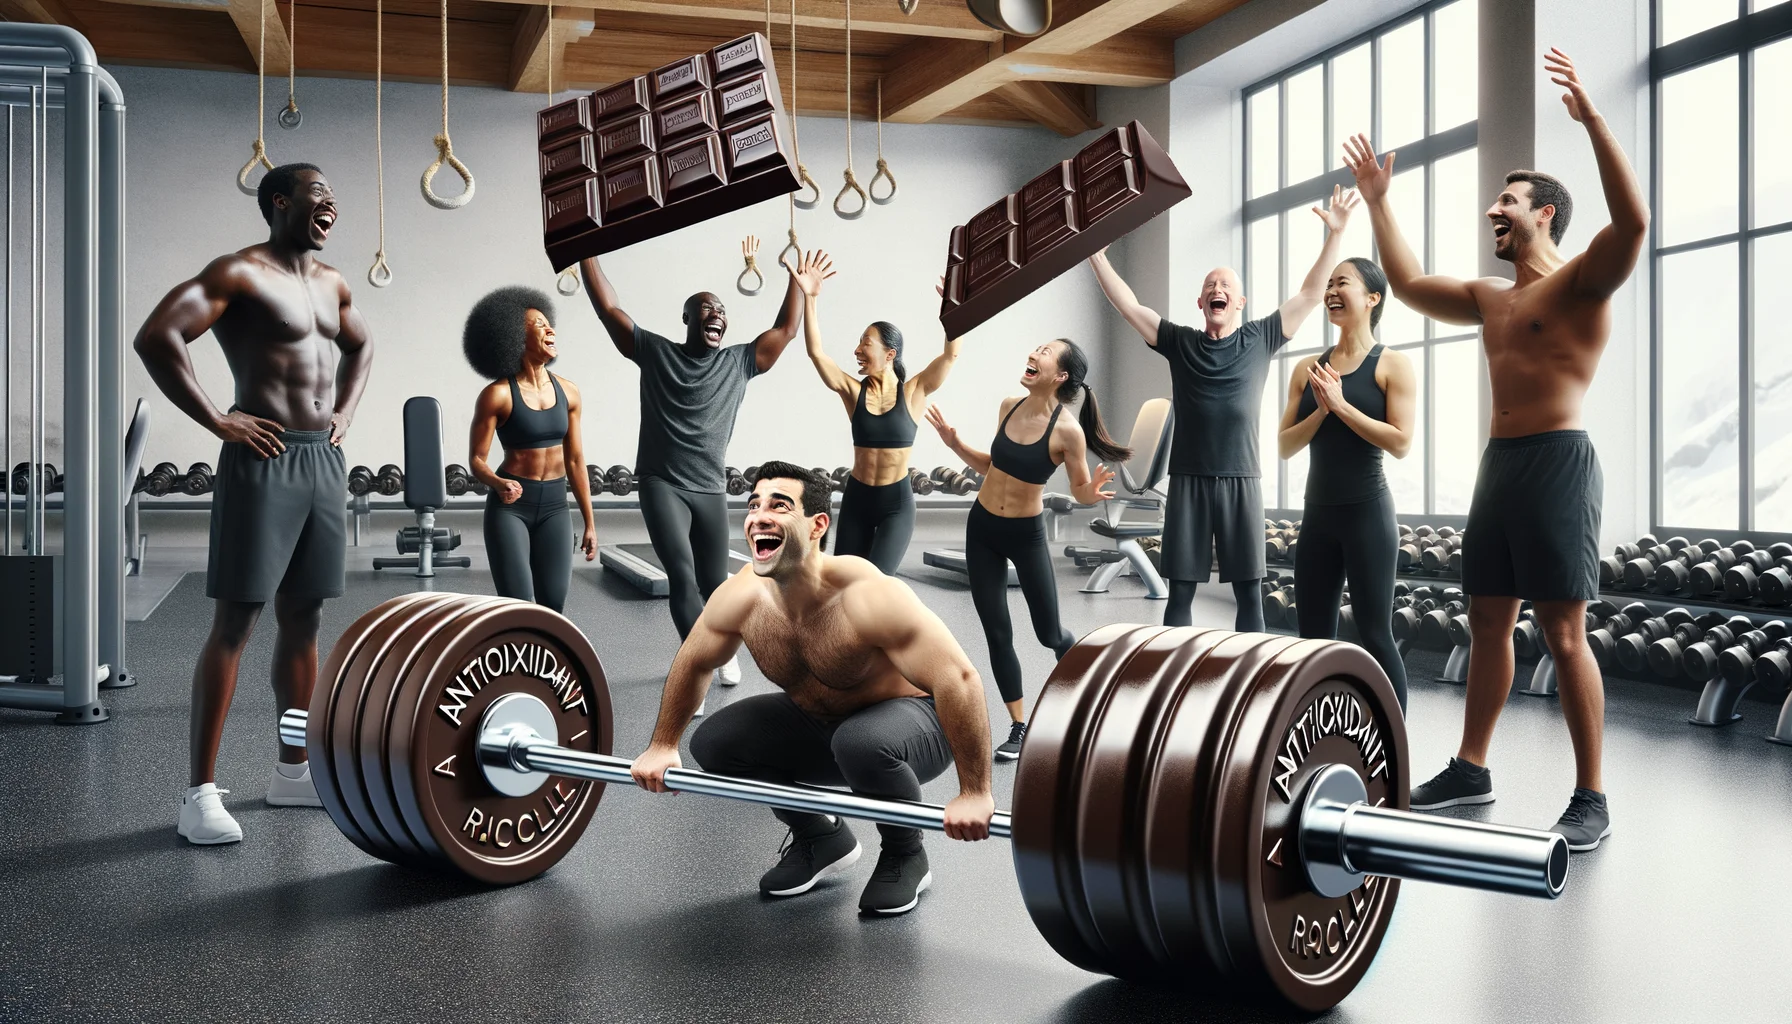 Imagine a scenario with a twist of humor showcasing 'Antioxidant-Rich Dark Chocolate Bars'. It takes place in a health and fitness gym. On the foreground, there is a barbell replaced by two large-sized Dark Chocolate bars on each end that look as realistic as possible. Around it, there are gym enthusiasts of different descents: black, caucasian, and Asian, each with different gender male, female, respectively, laughing and trying to lift it. Their expressions illustrate surprise and amusement seeing antioxidant dark chocolate bars used as gym equipment.